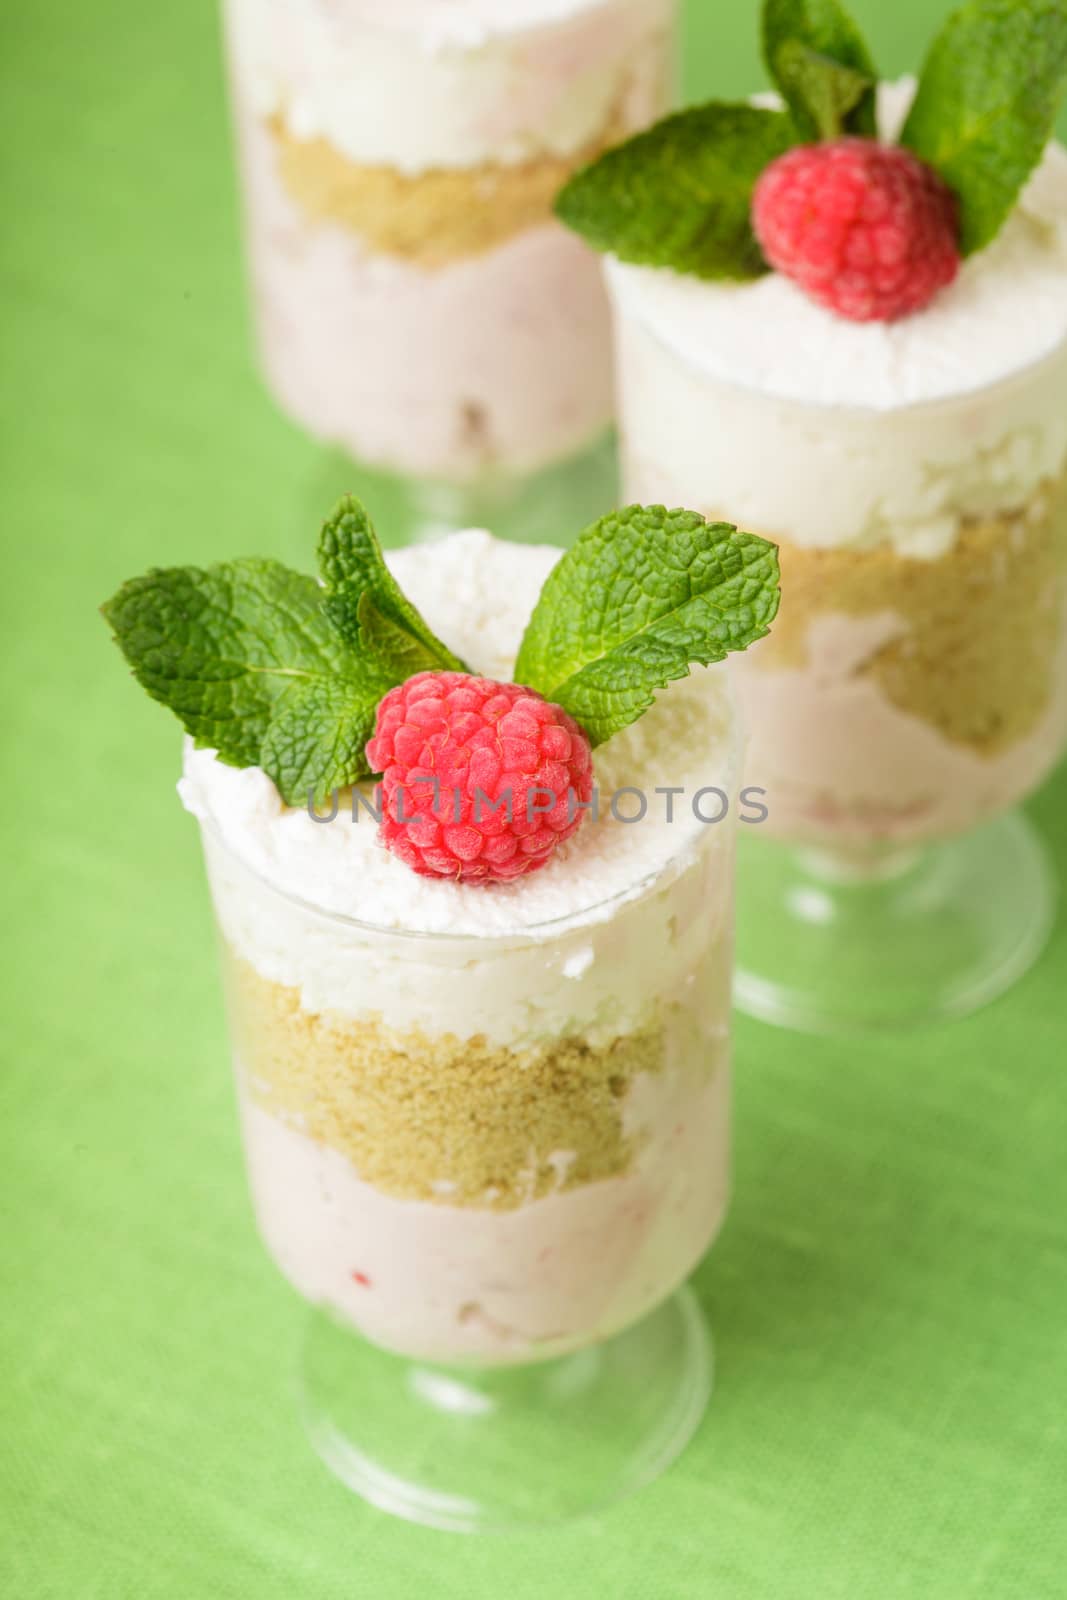 Dessert with raspberry and curd mousse with mint leaves